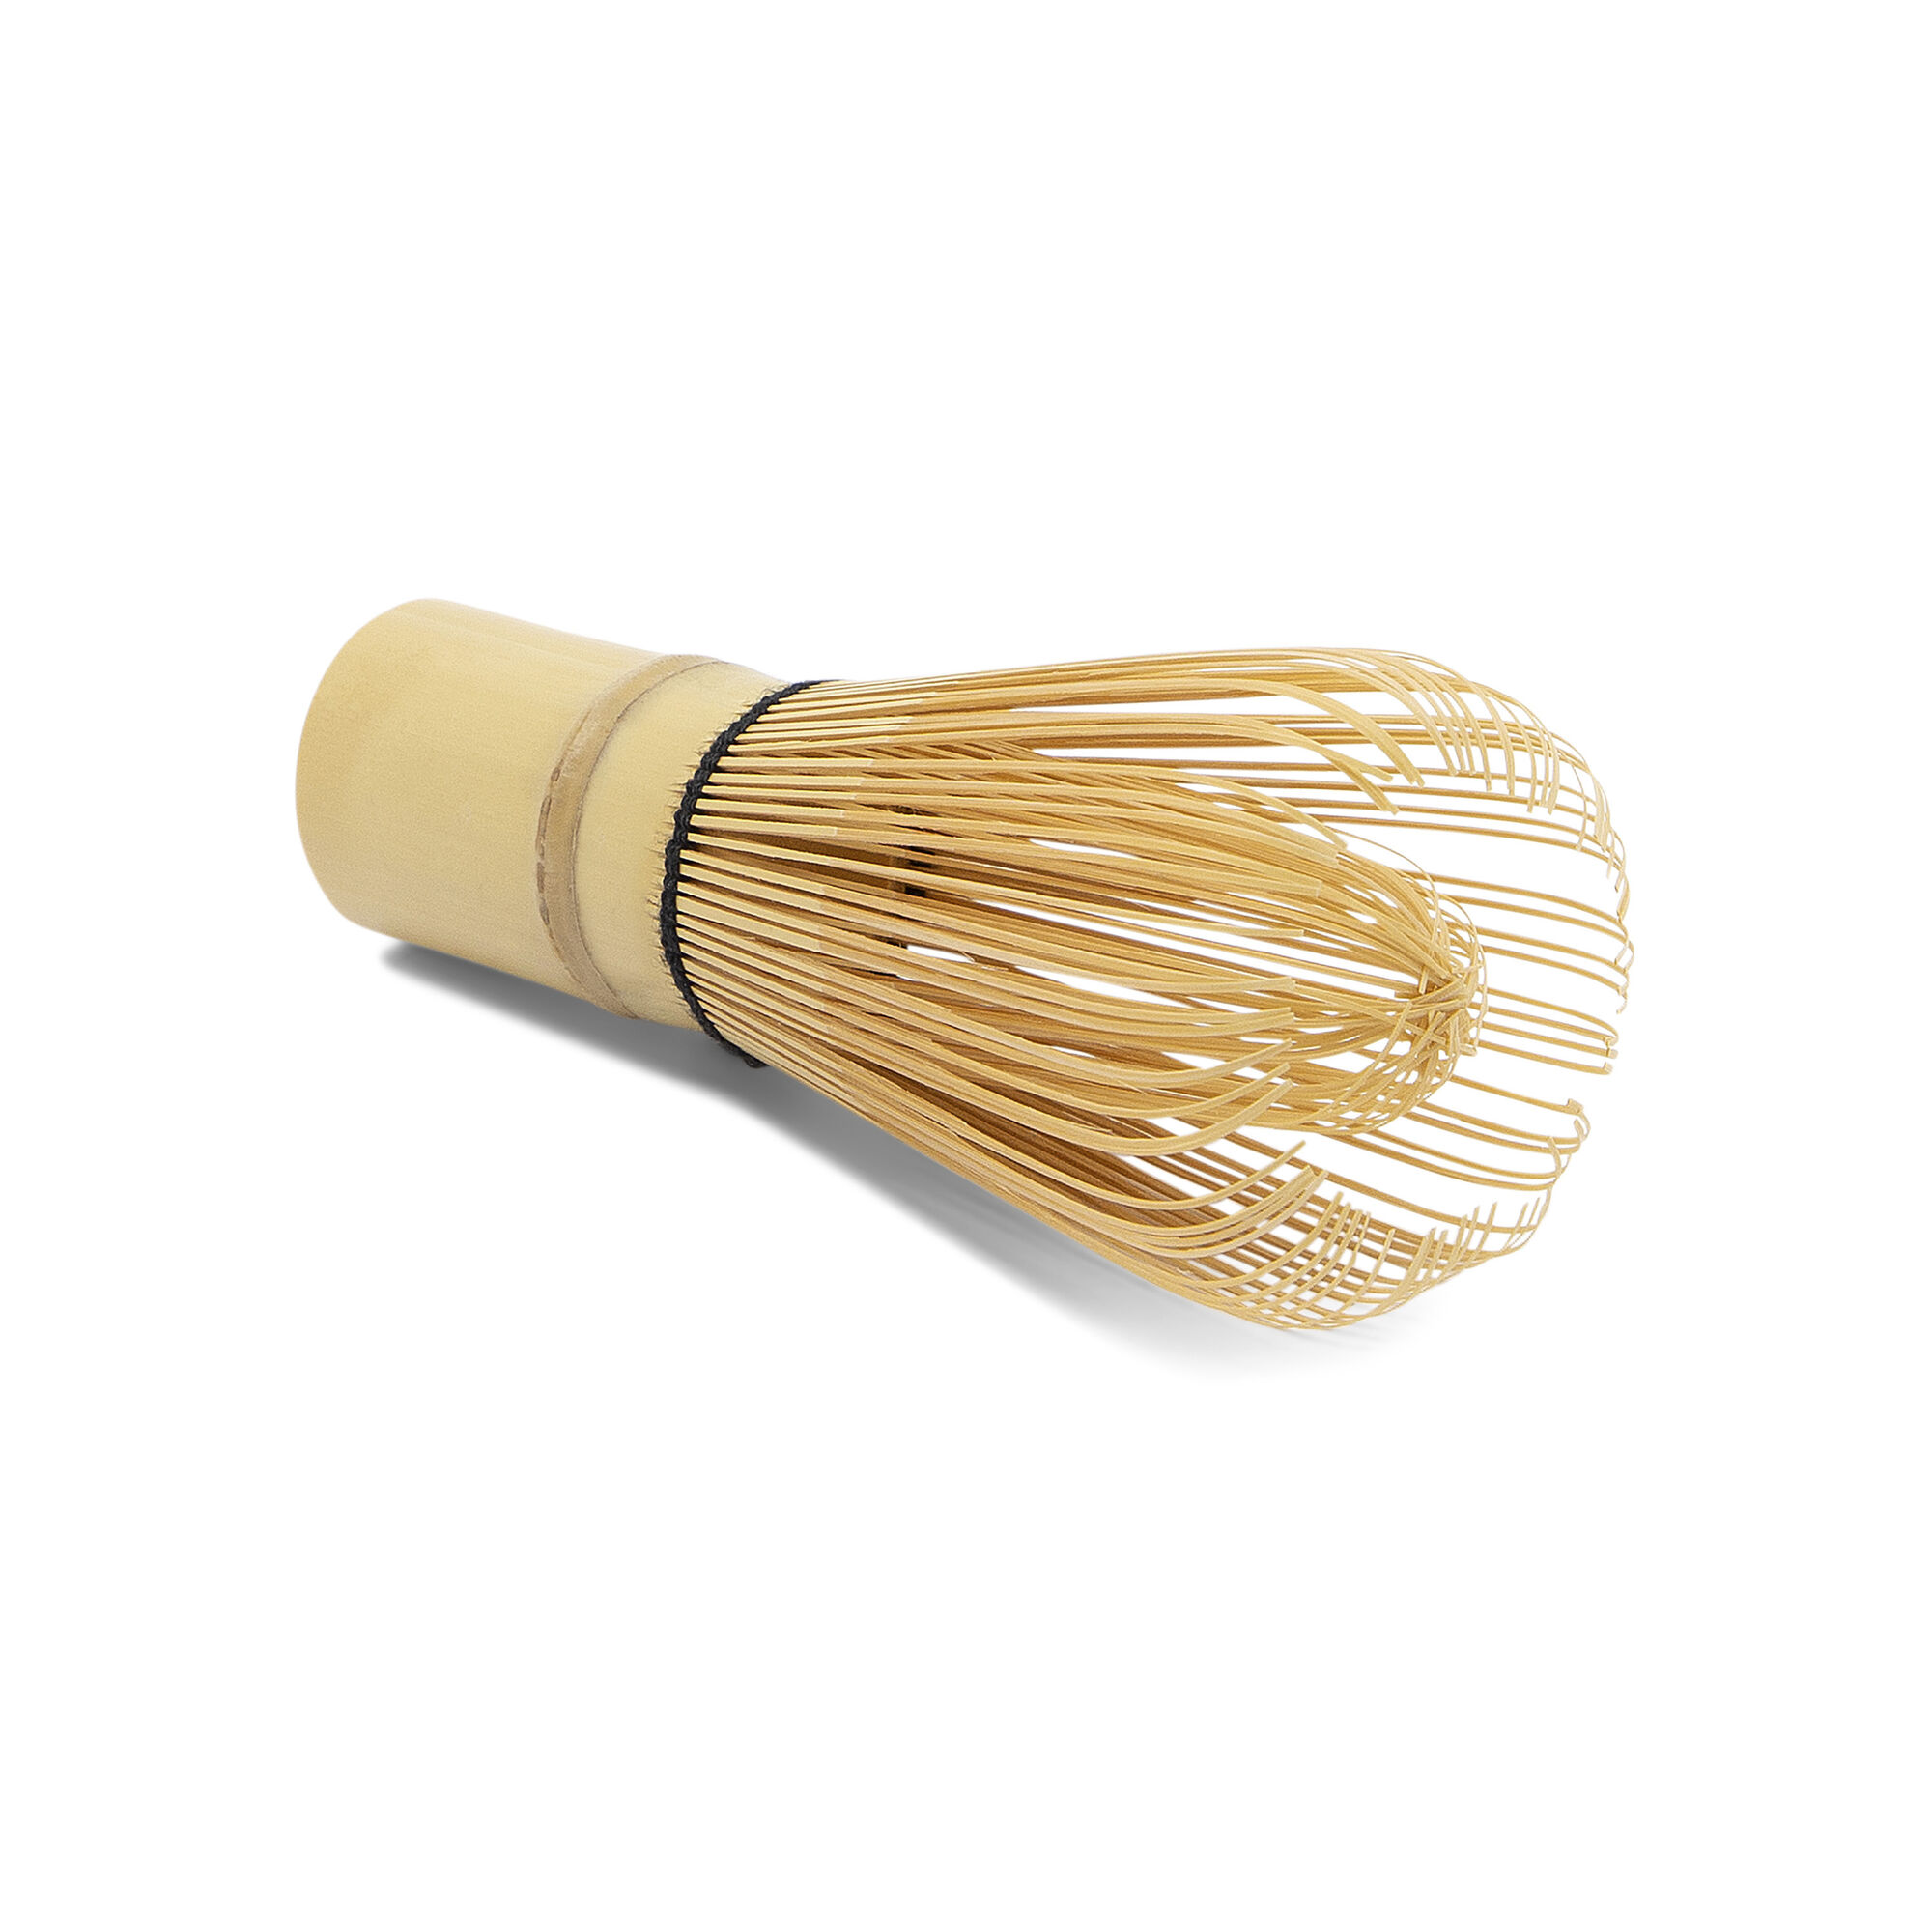 Traditional Matcha Whisk & Spoon - Matcha Bamboo Whisk For Ceremonial Tea  Preparation - Authentic Japanese Bamboo Whisk For Matcha Tea - Matcha Tea